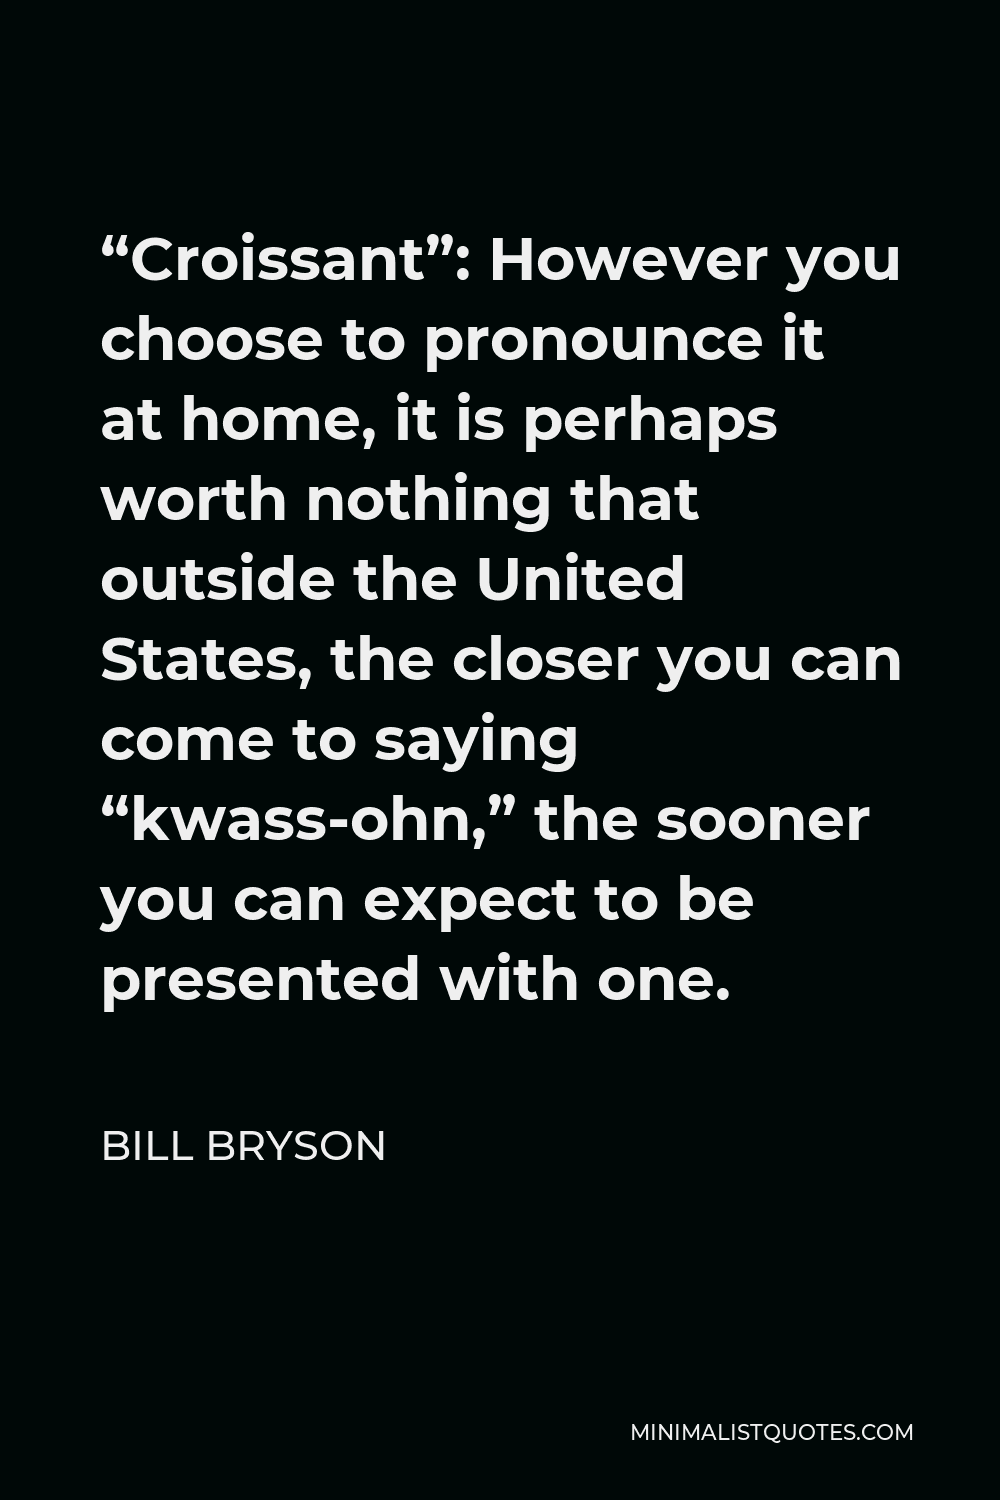 Bill Bryson Quote - “Croissant”: However you choose to pronounce it at home, it is perhaps worth nothing that outside the United States, the closer you can come to saying “kwass-ohn,” the sooner you can expect to be presented with one.